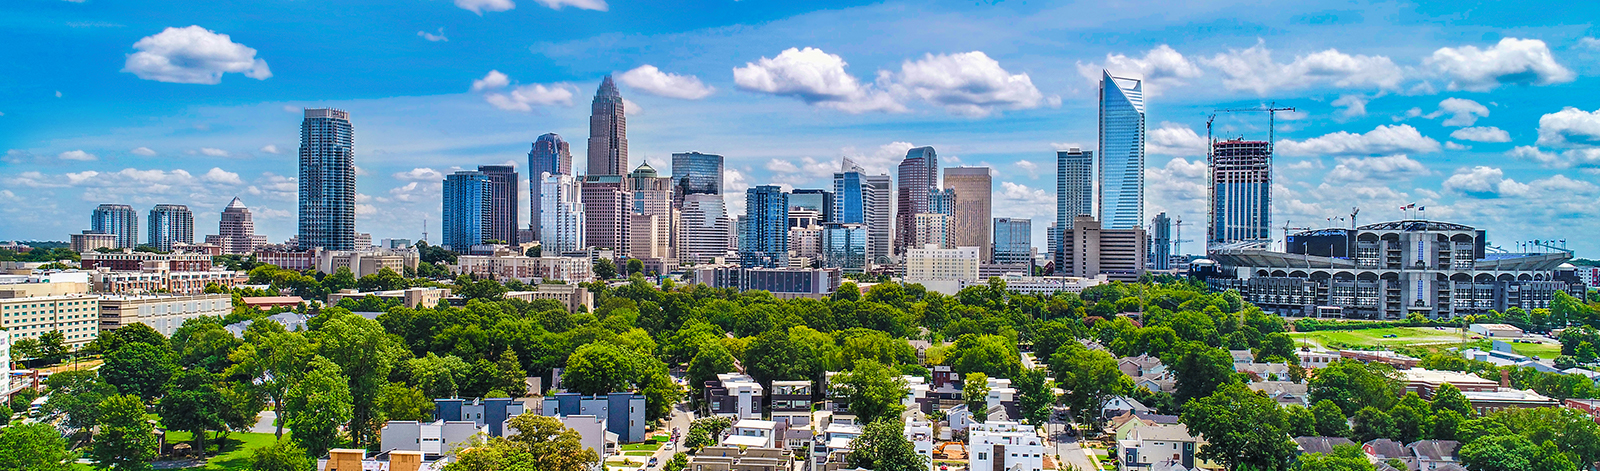 Aerial Skyline View of Downtown Charlotte, North Carolina